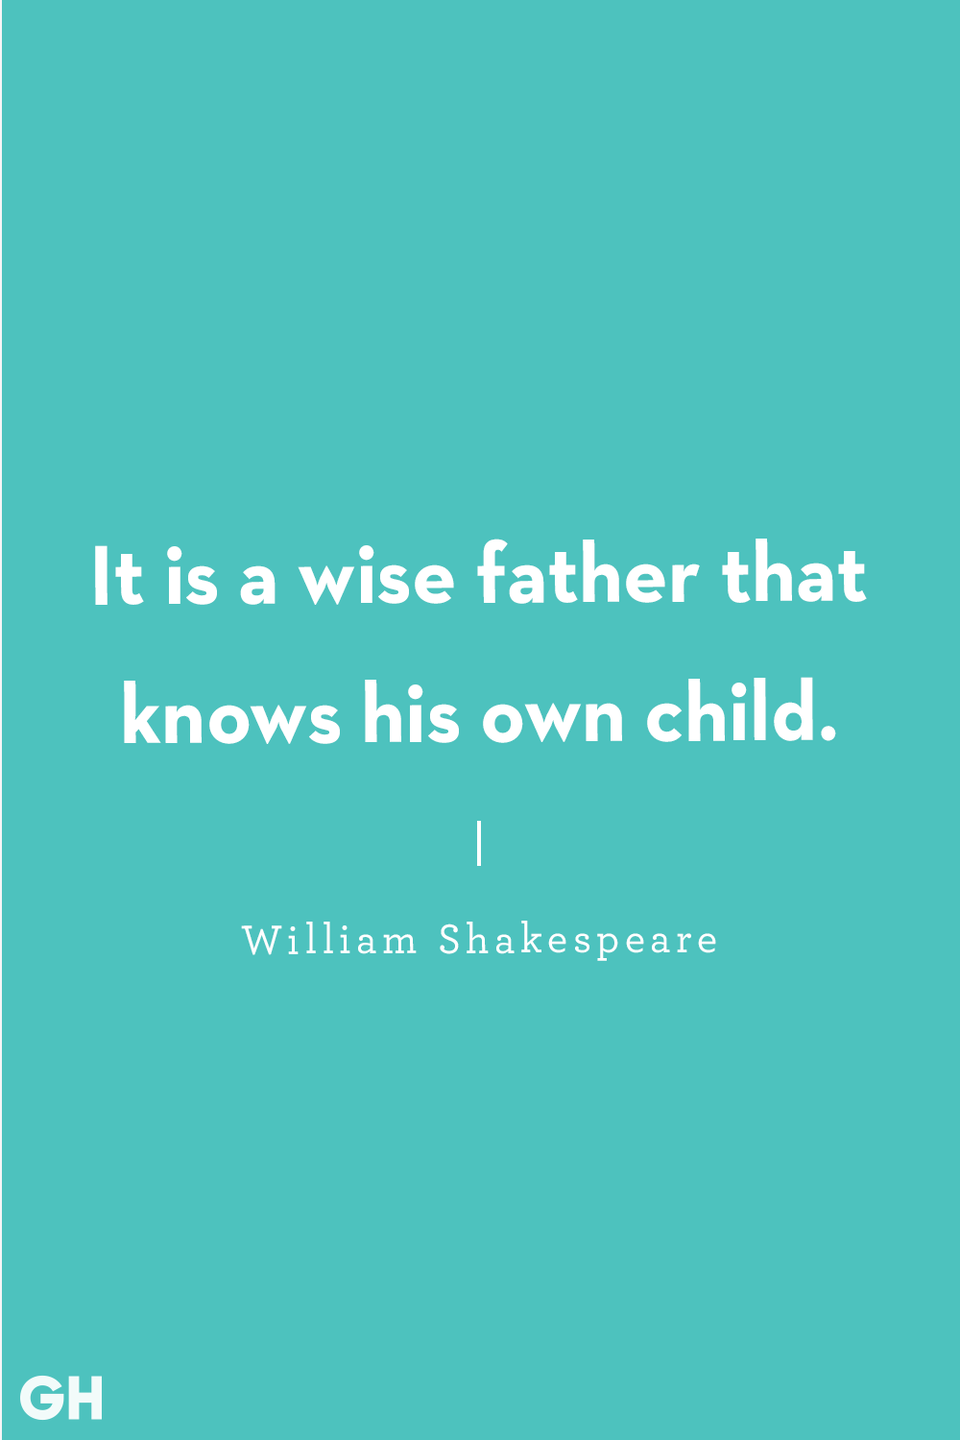 <p>“It is a wise father that knows his own child.”</p>